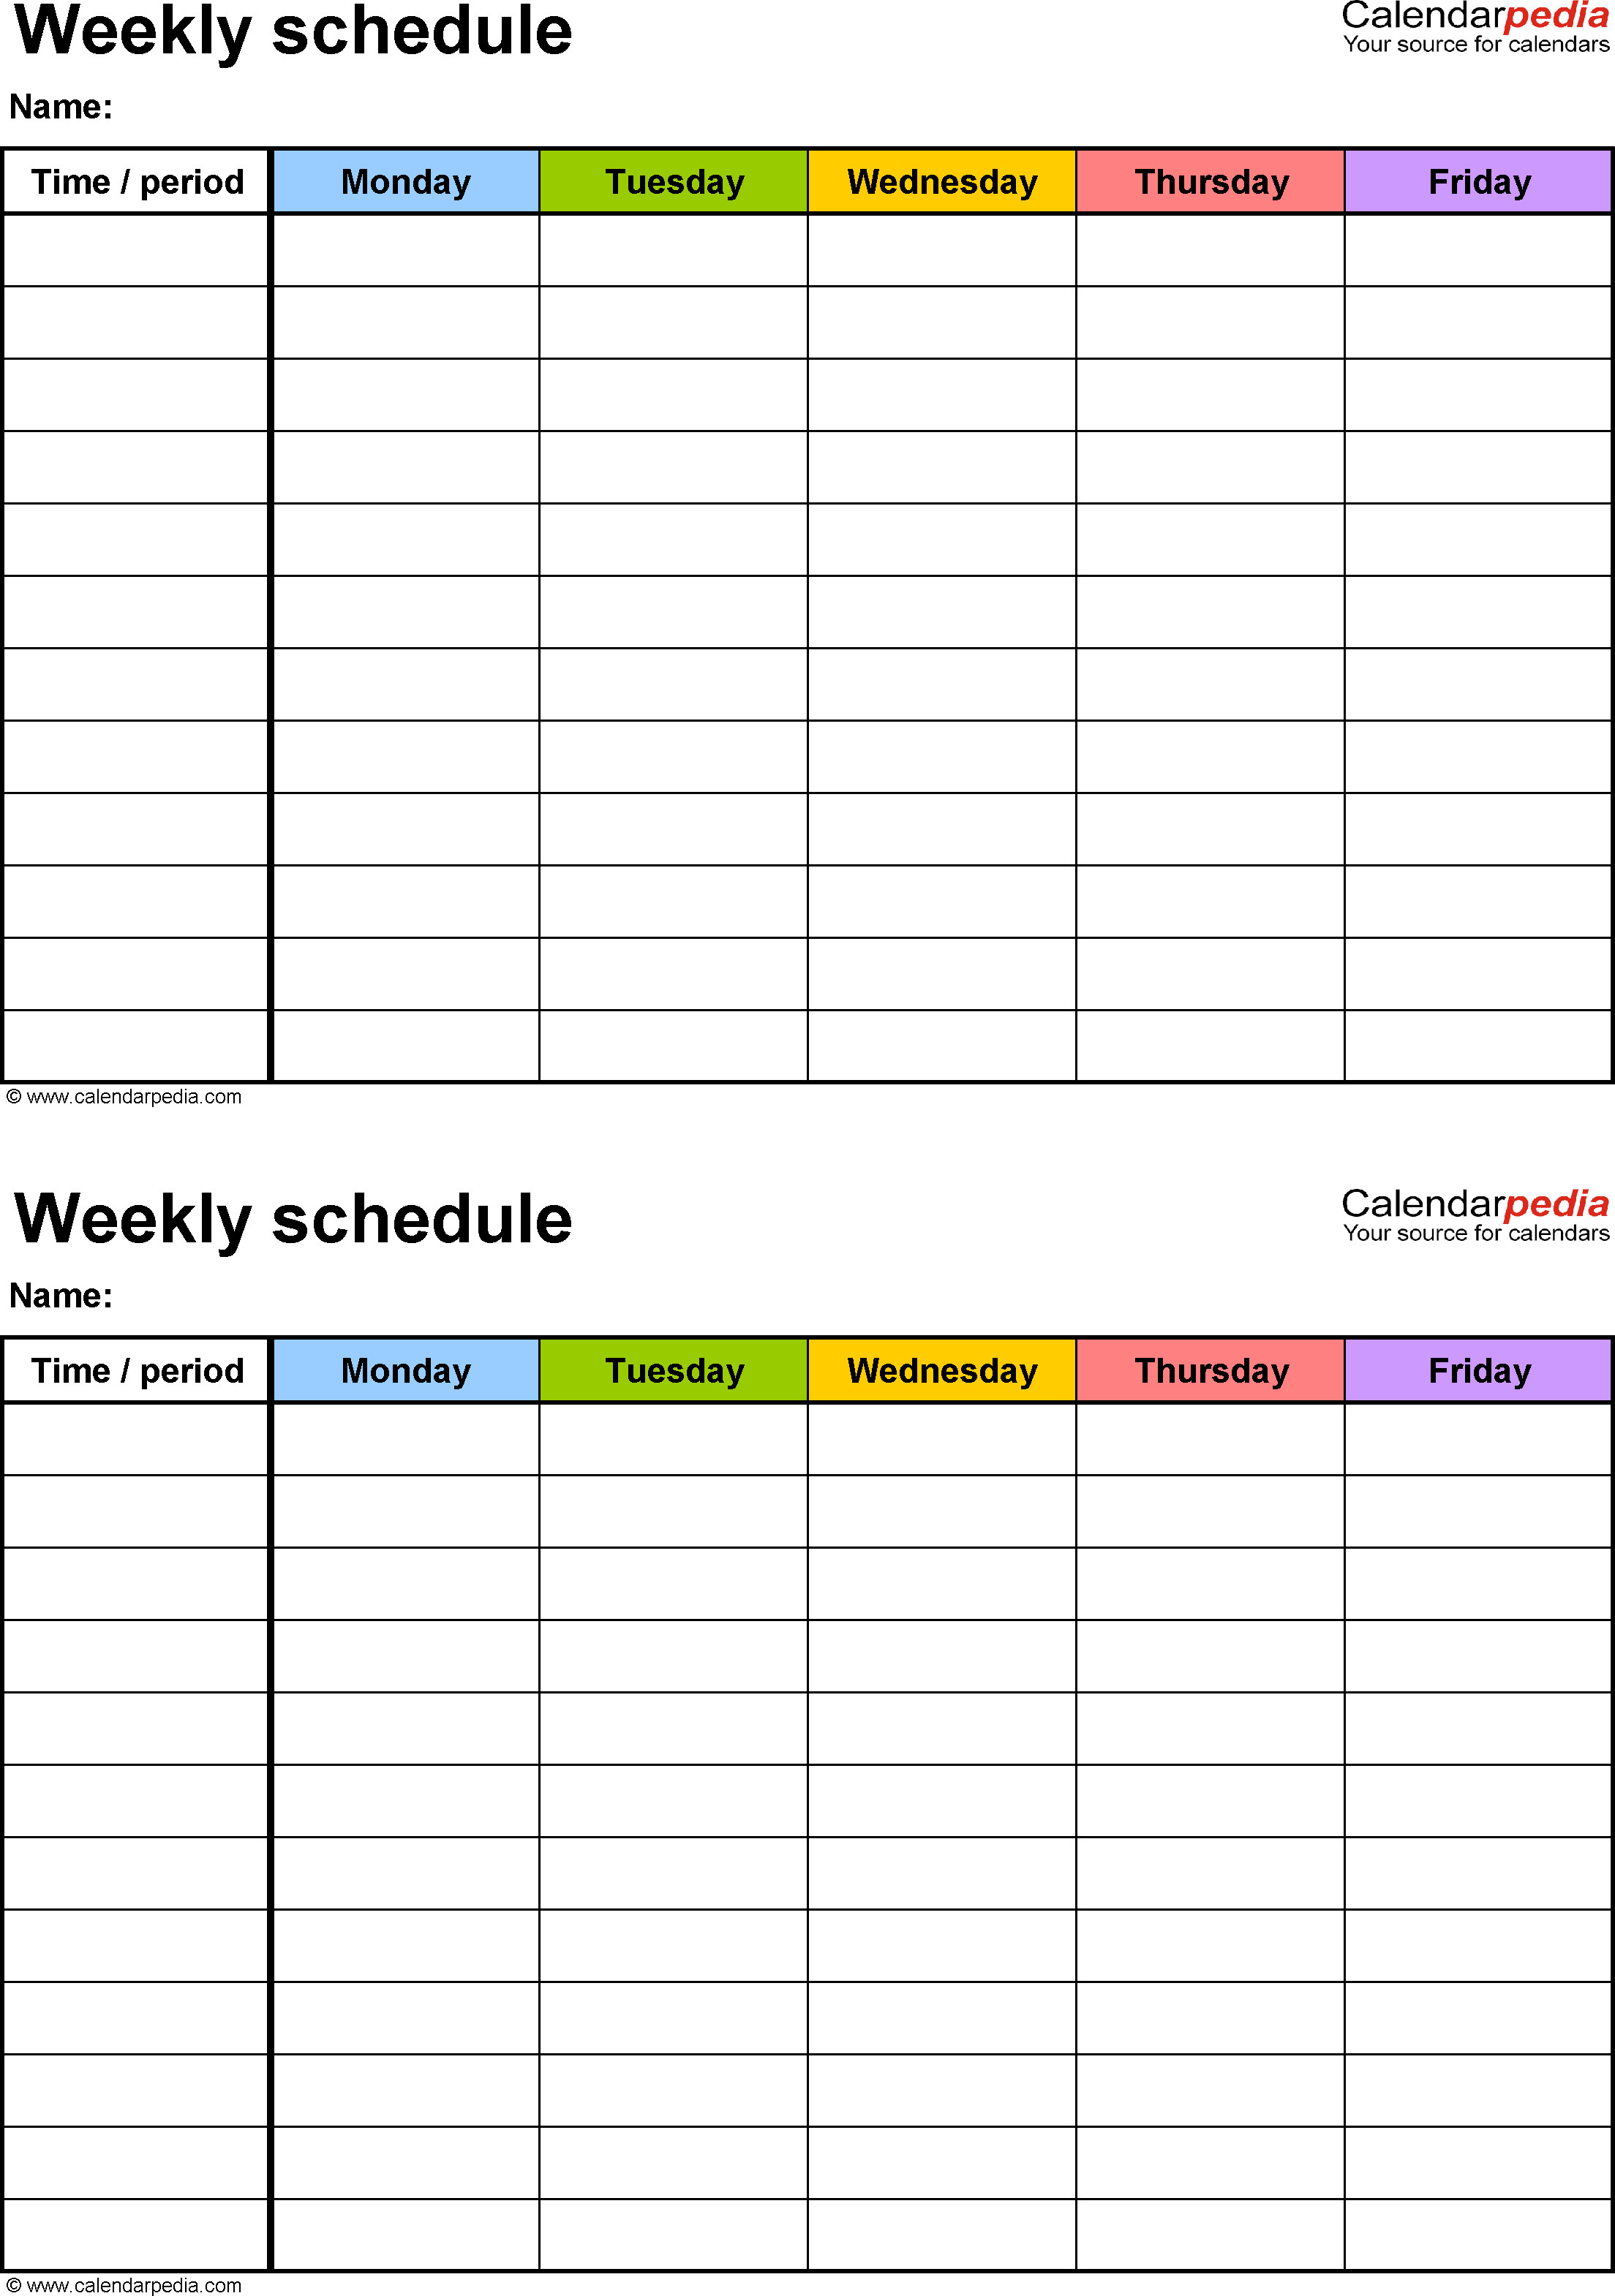 Monthly Schedule Template Excel Free Weekly Schedule Templates for Excel 18 Templates